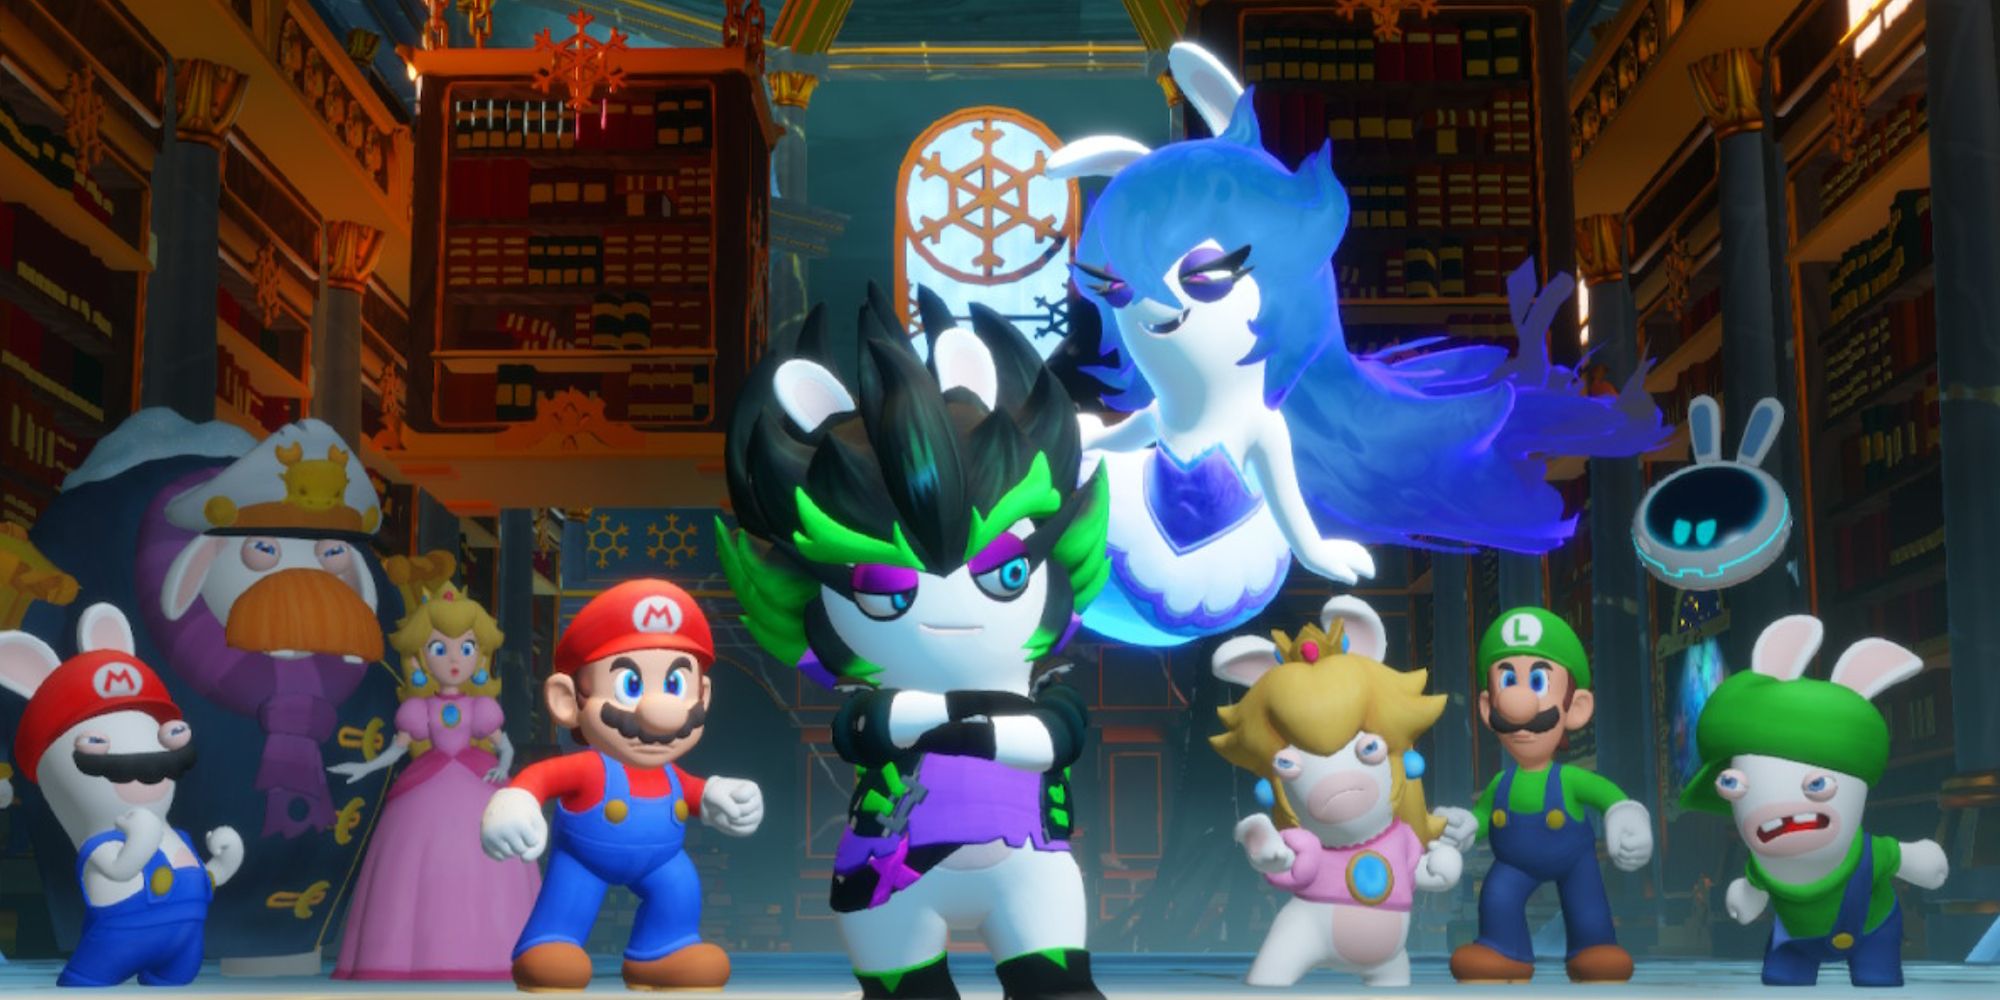 Midnite trying to seduce Edge in Mario + Rabbids Sparks of Hope